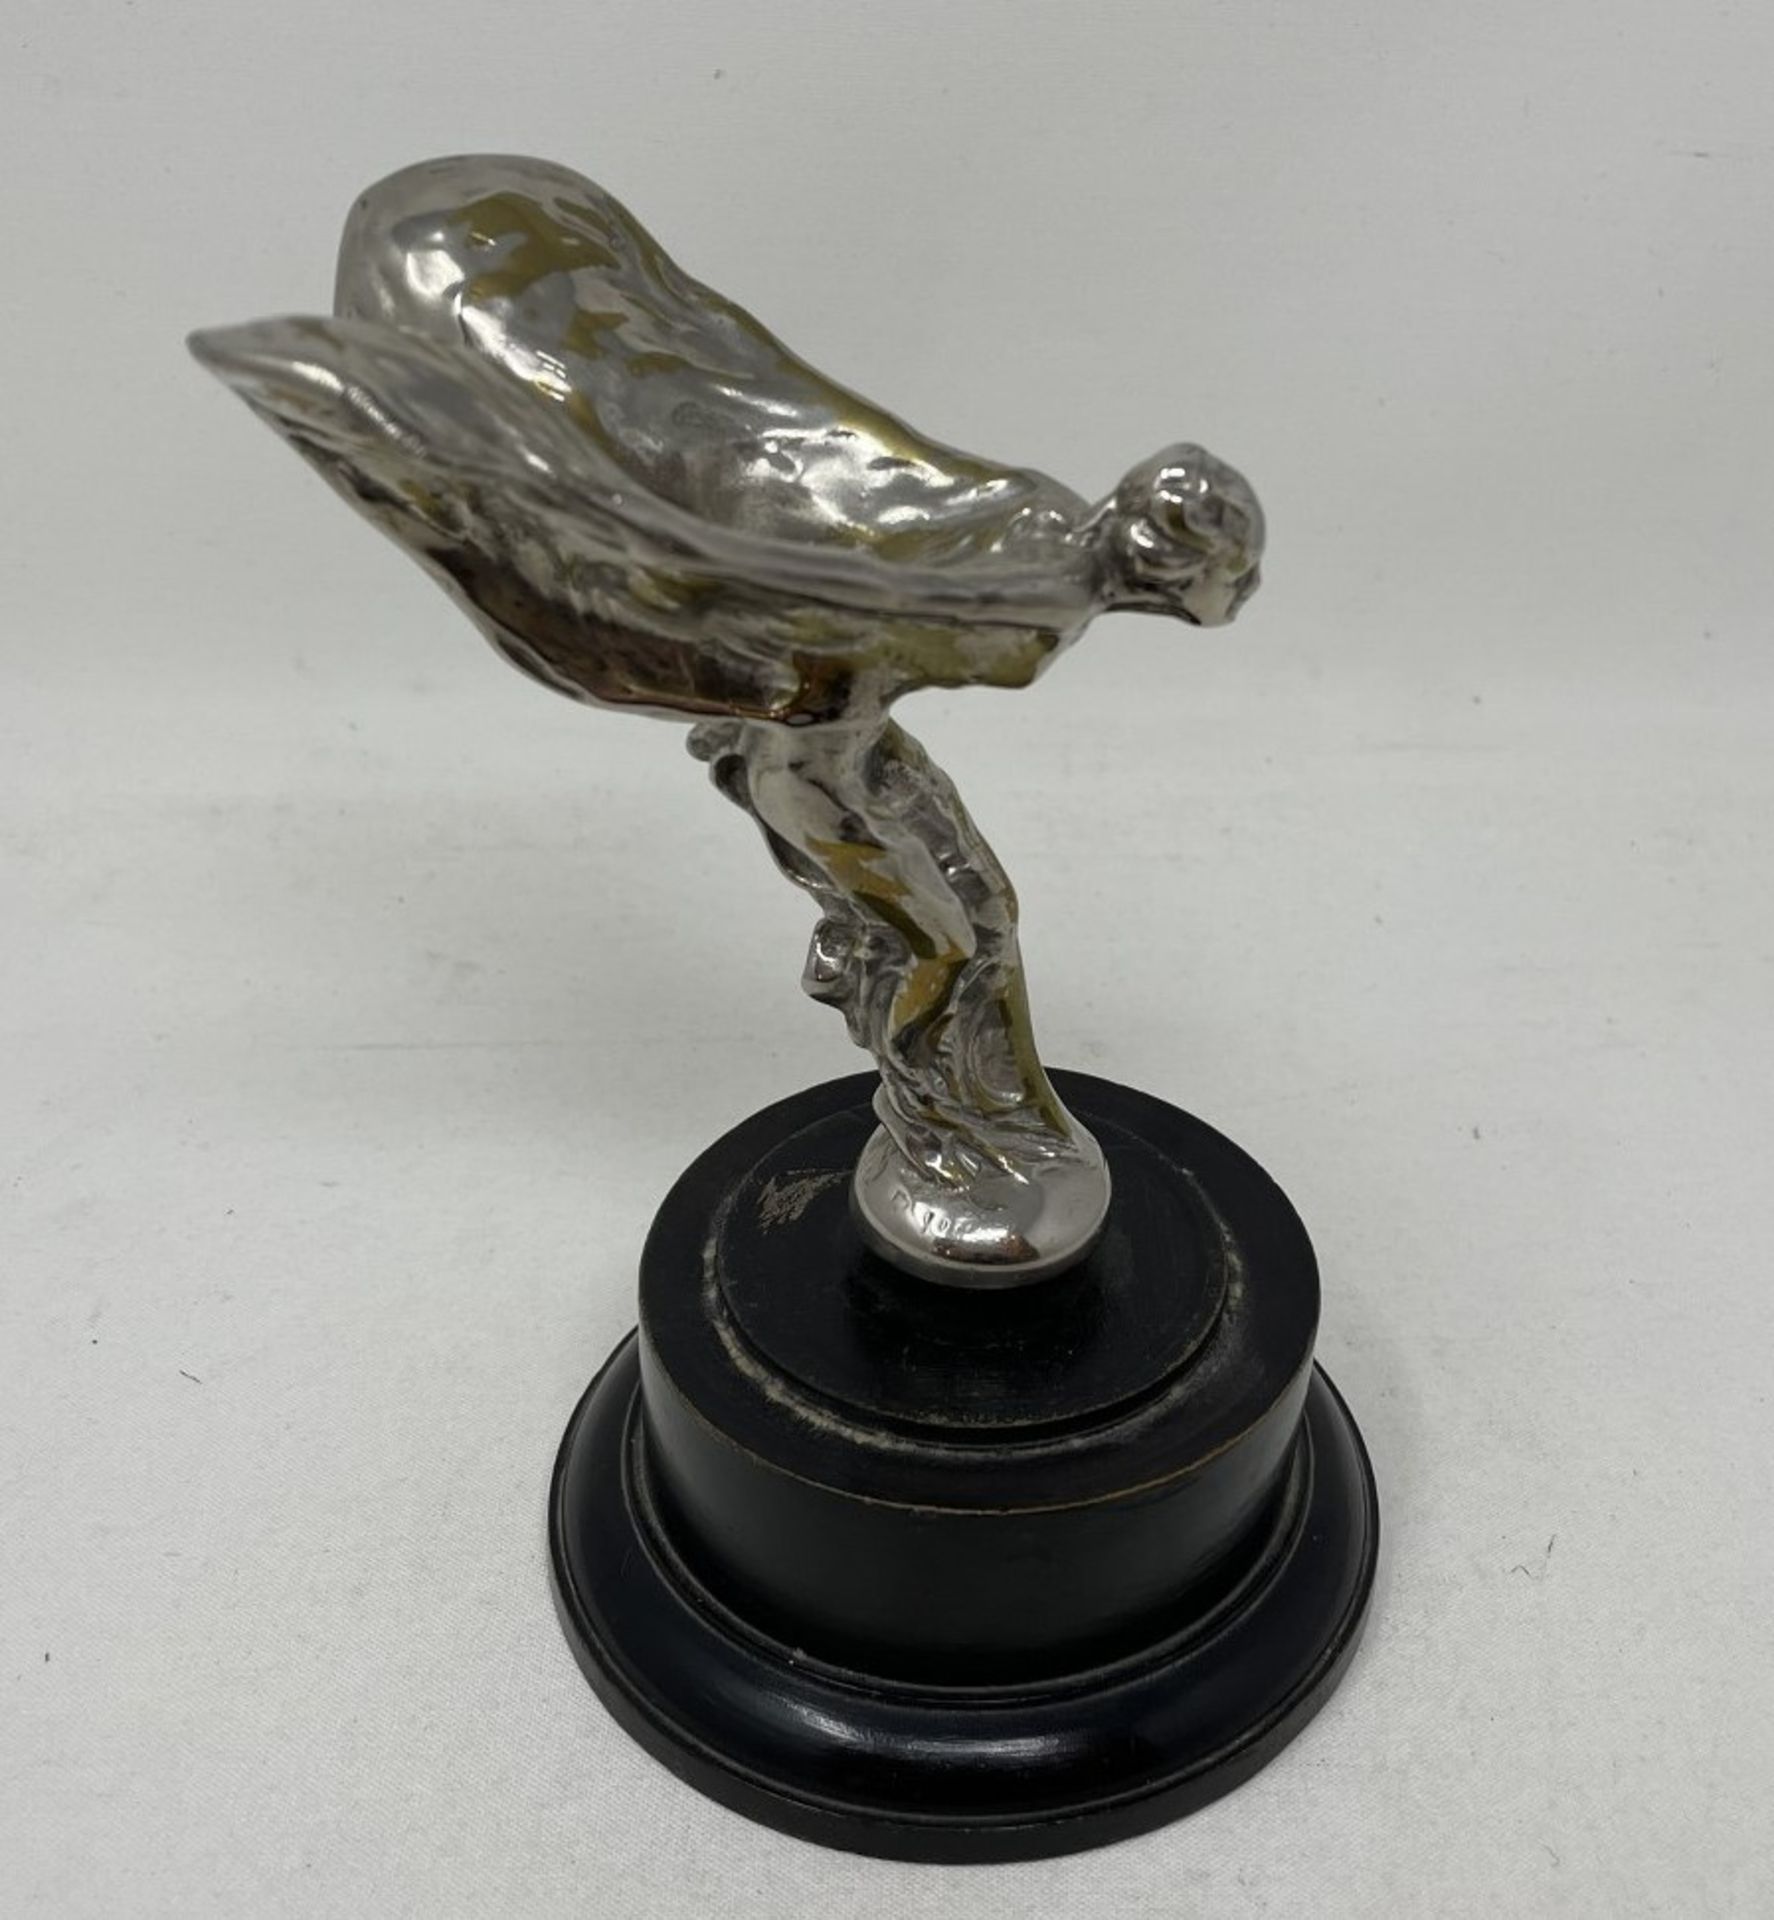 A Rolls-Royce 20hp Spirit of Ecstasy, mounted on a plinth base, 16.5 cm high (overall)